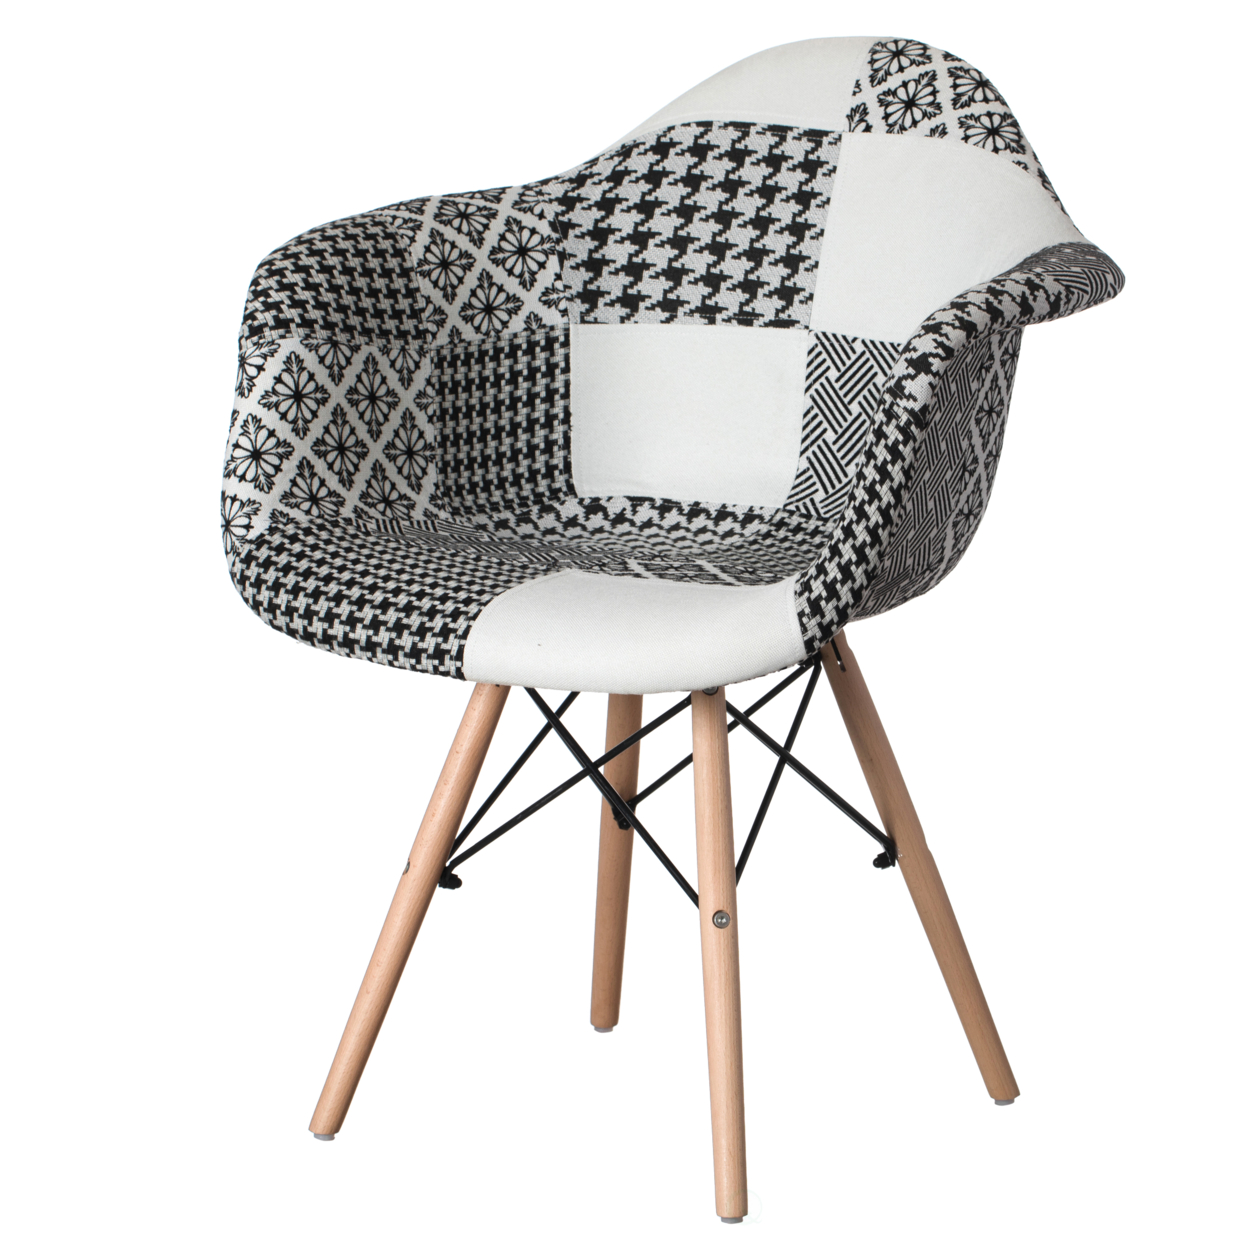 Mid-Century Modern Style Fabric Lined Armchair with Beech Wooden Legs - Black and White Single